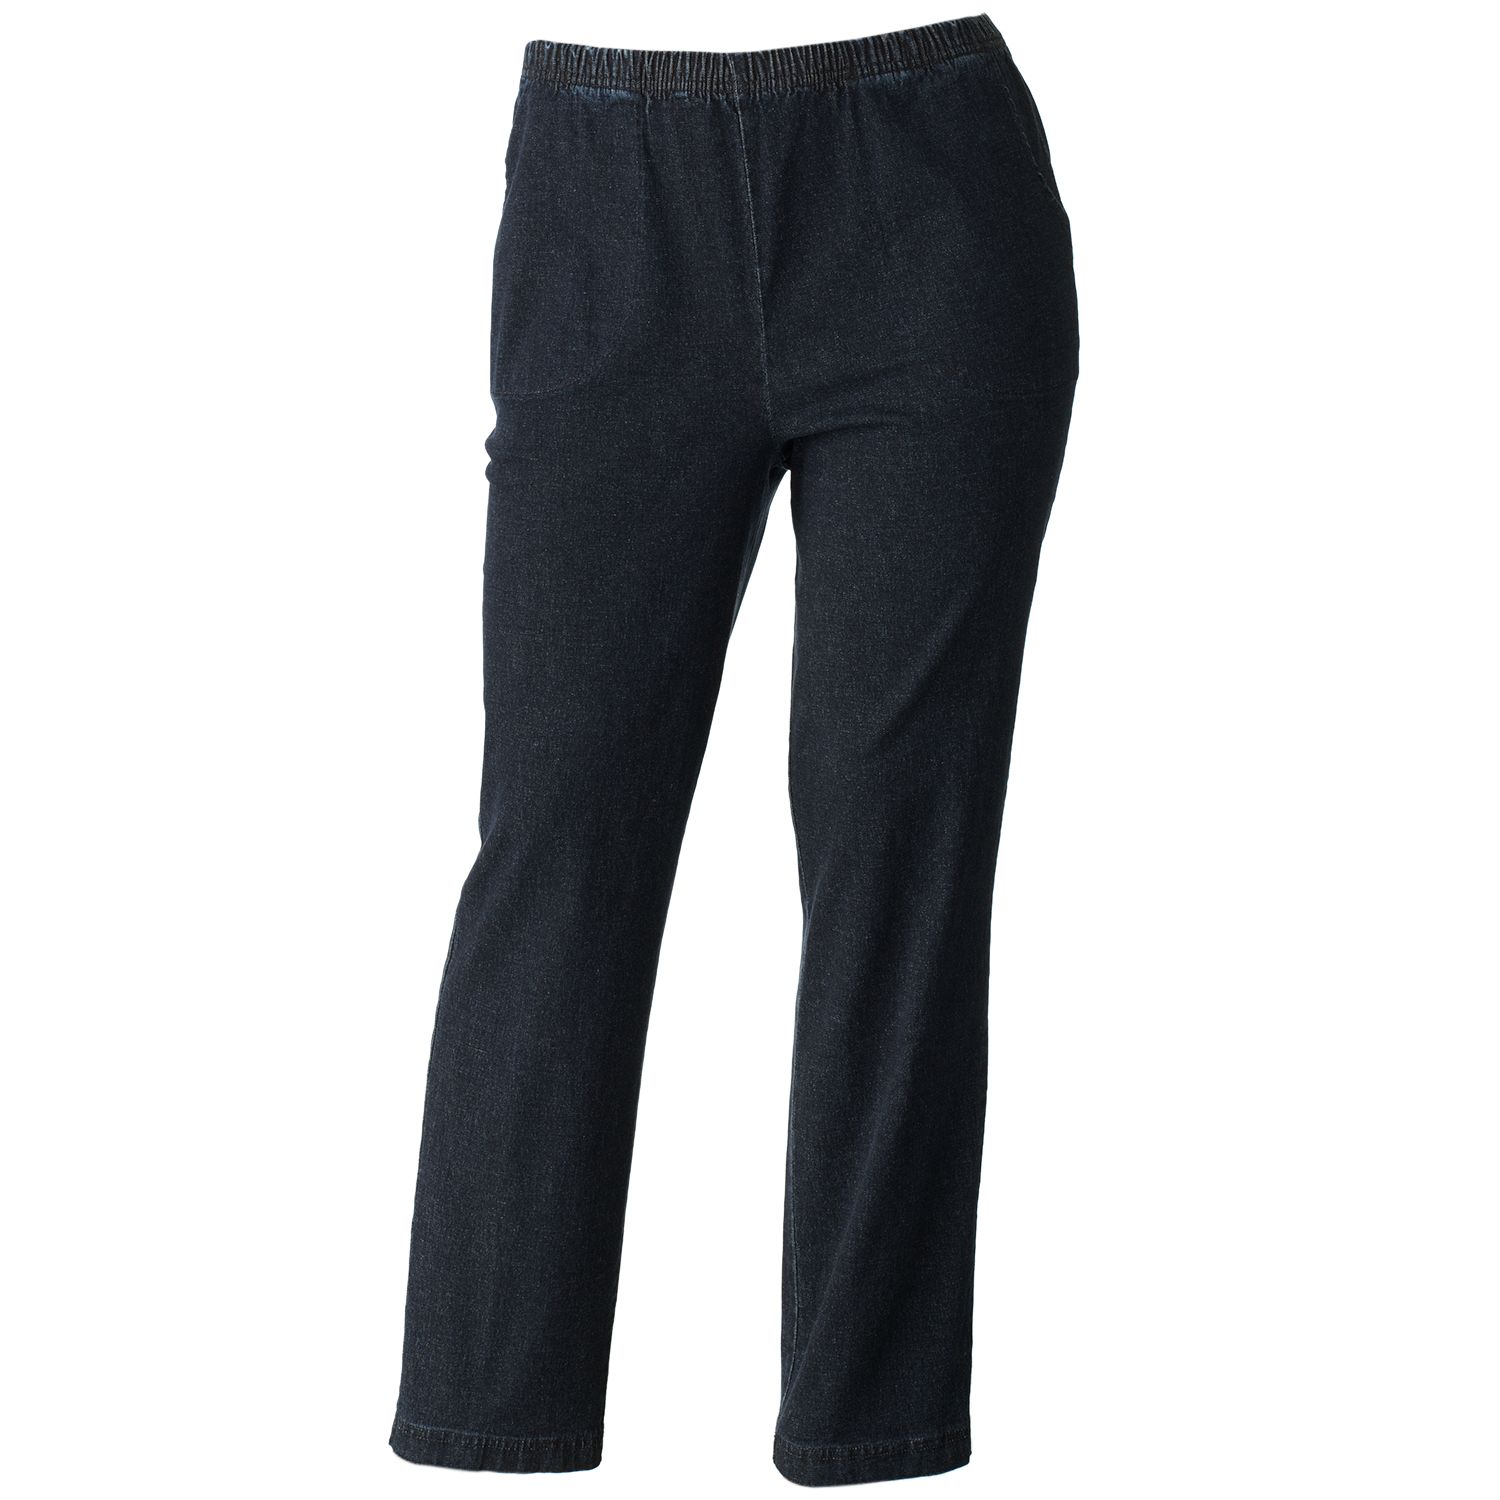 croft and barrow plus size jeans